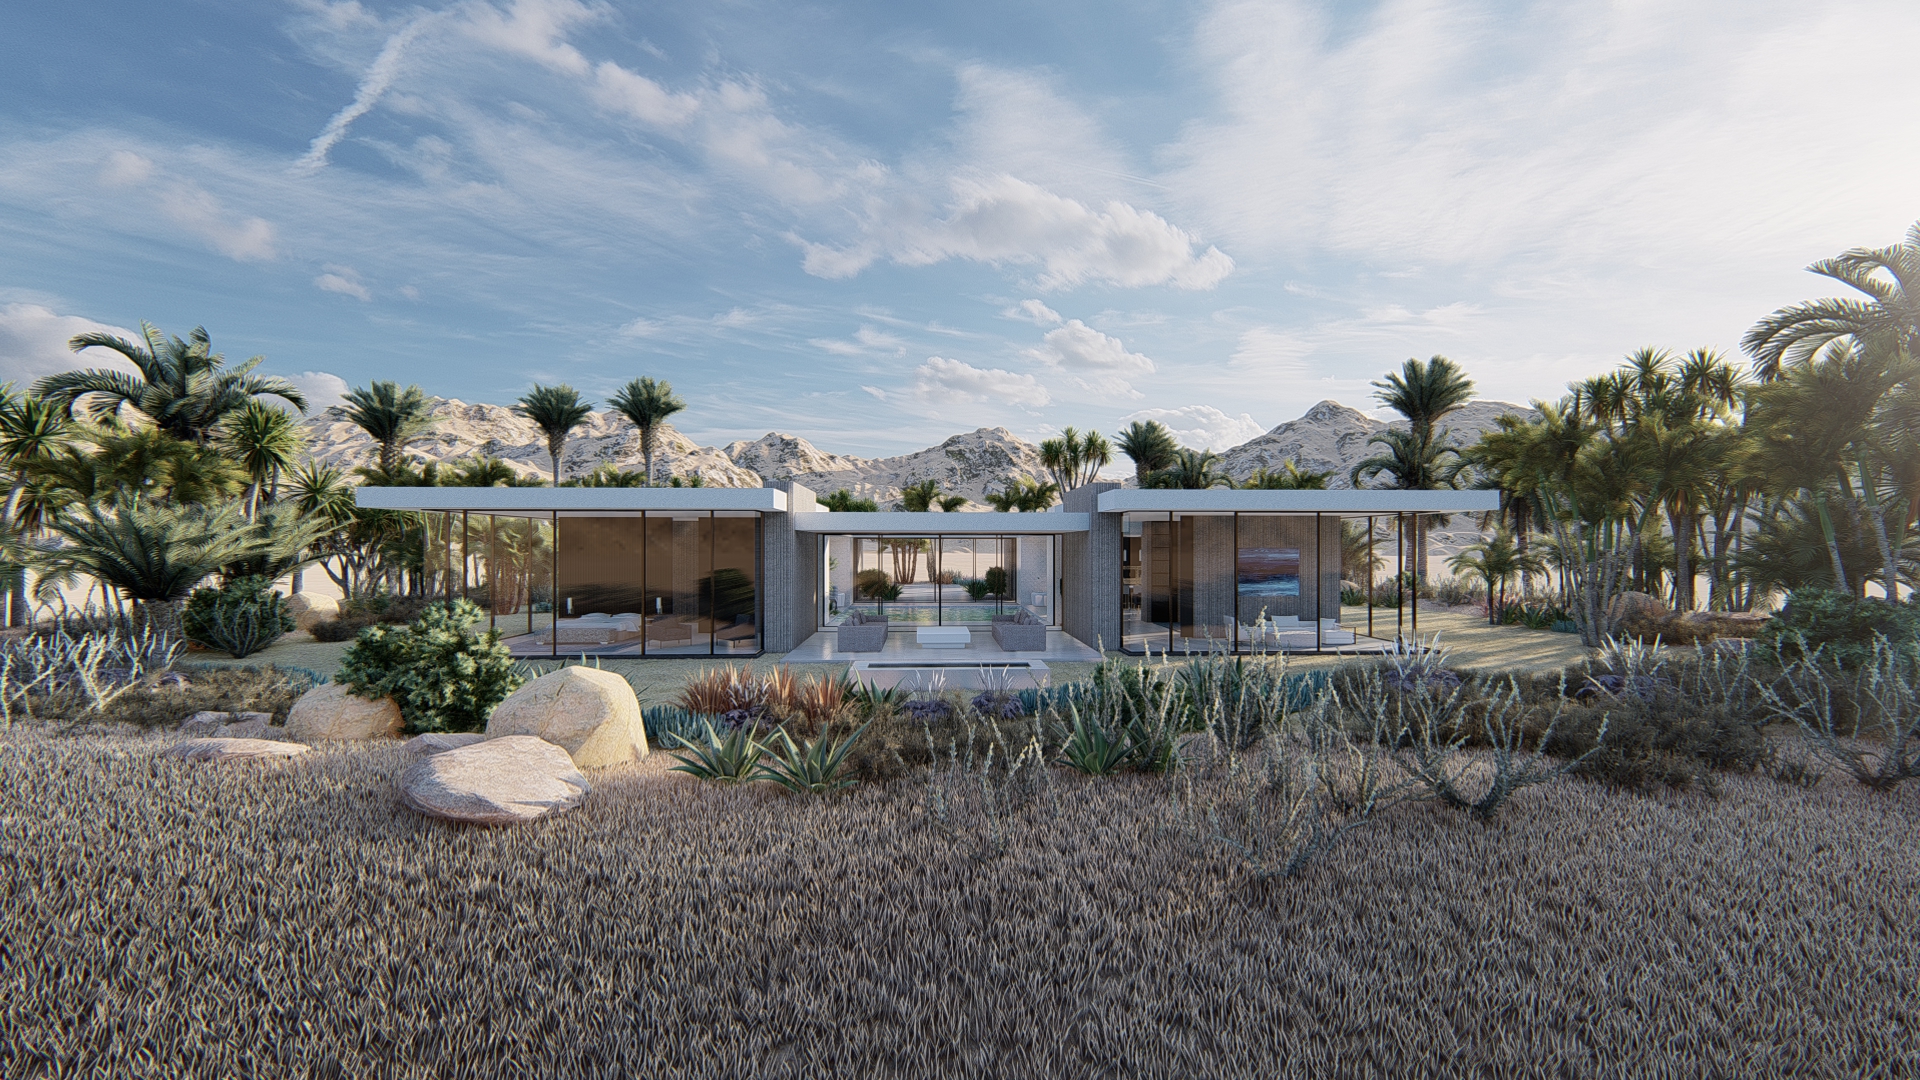 Paolo-Volpis-Architect-california-arizona-nevada-desert-house-modern-white-minimalist-wood-slats-teak-glass-concrete-water-feature-roof-garden-flat-roof-metal-steel-structure-with (20).jpg